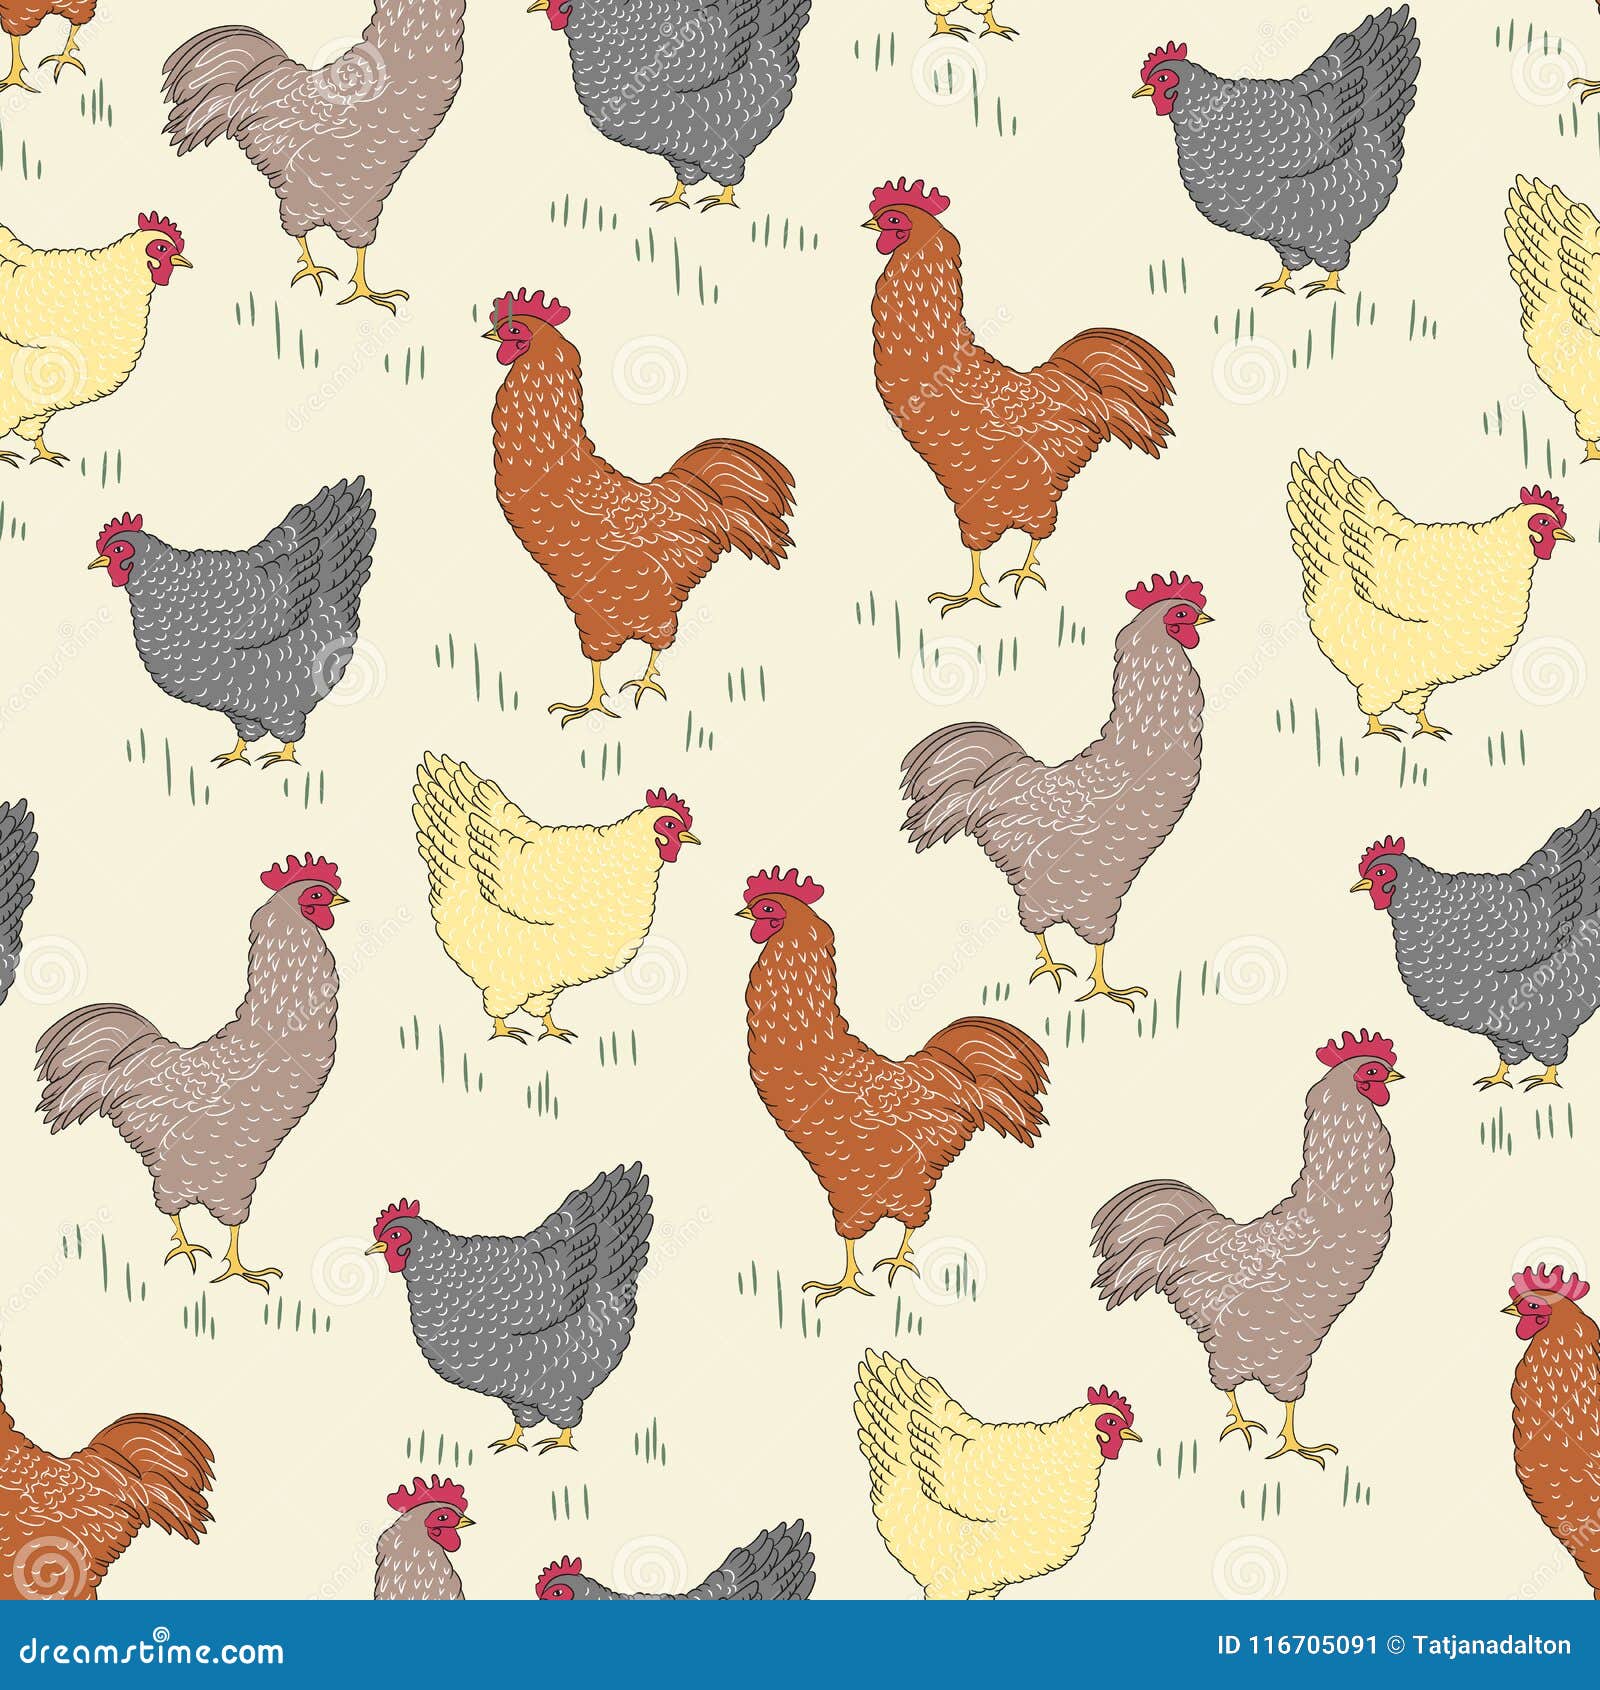 Chickens seamless pattern INSTANT DOWNLOAD background